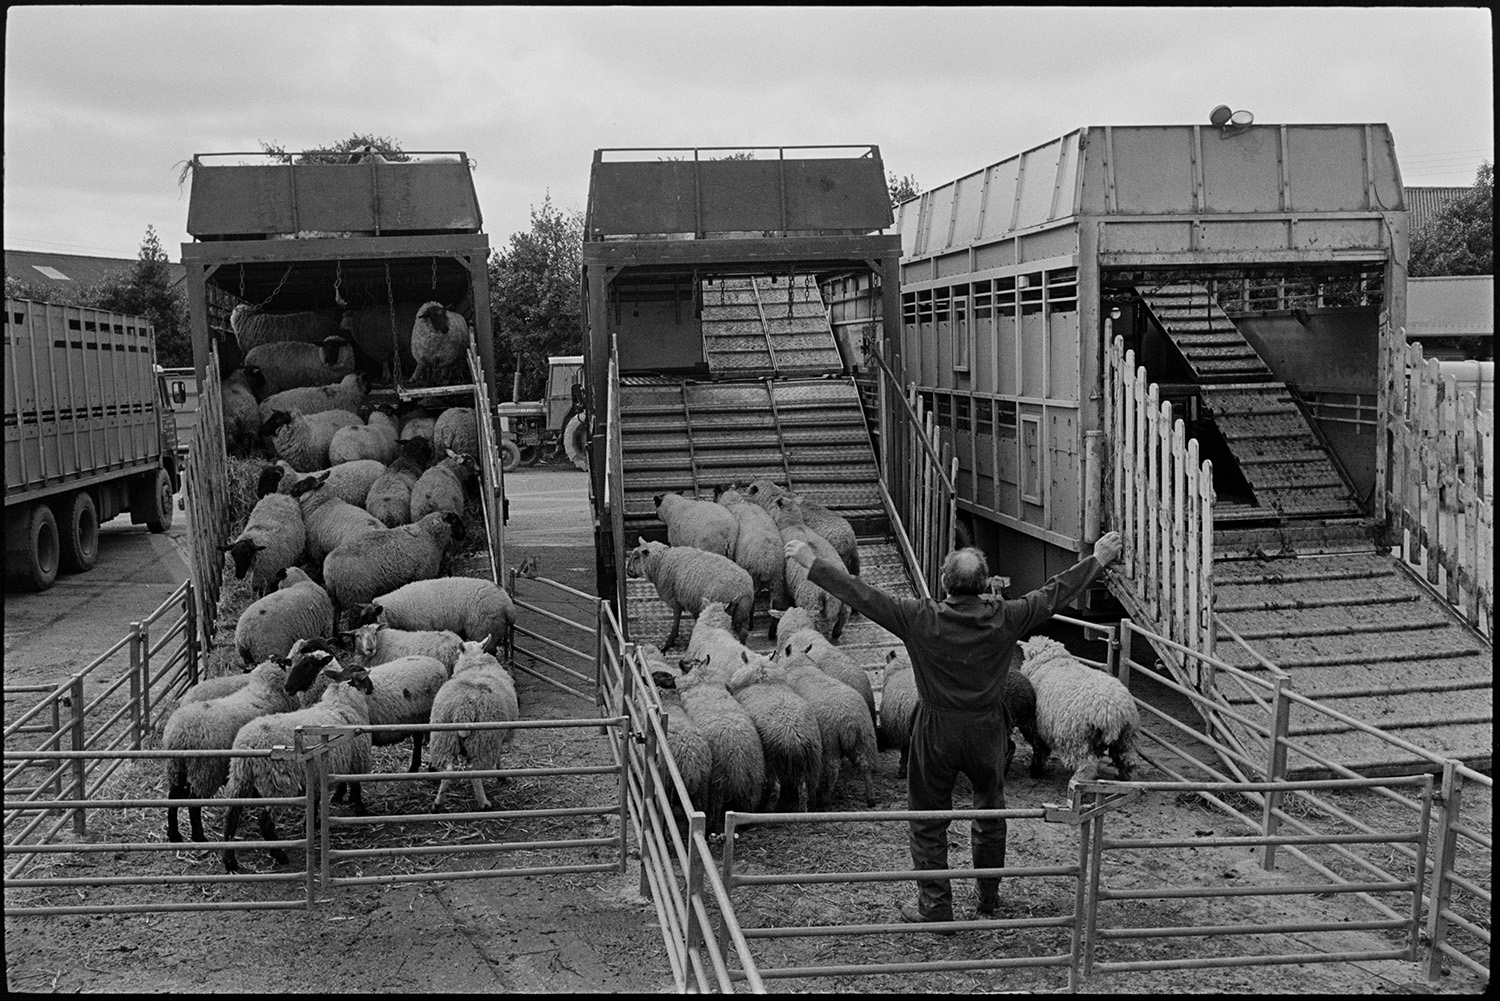 Sheep being loaded and unloaded at market. Lorries parked.
[Sheep being loaded into the back of two lorries parked at South Molton market. Another lorry is waiting to be loaded next to them. The lorries have three tiers.]